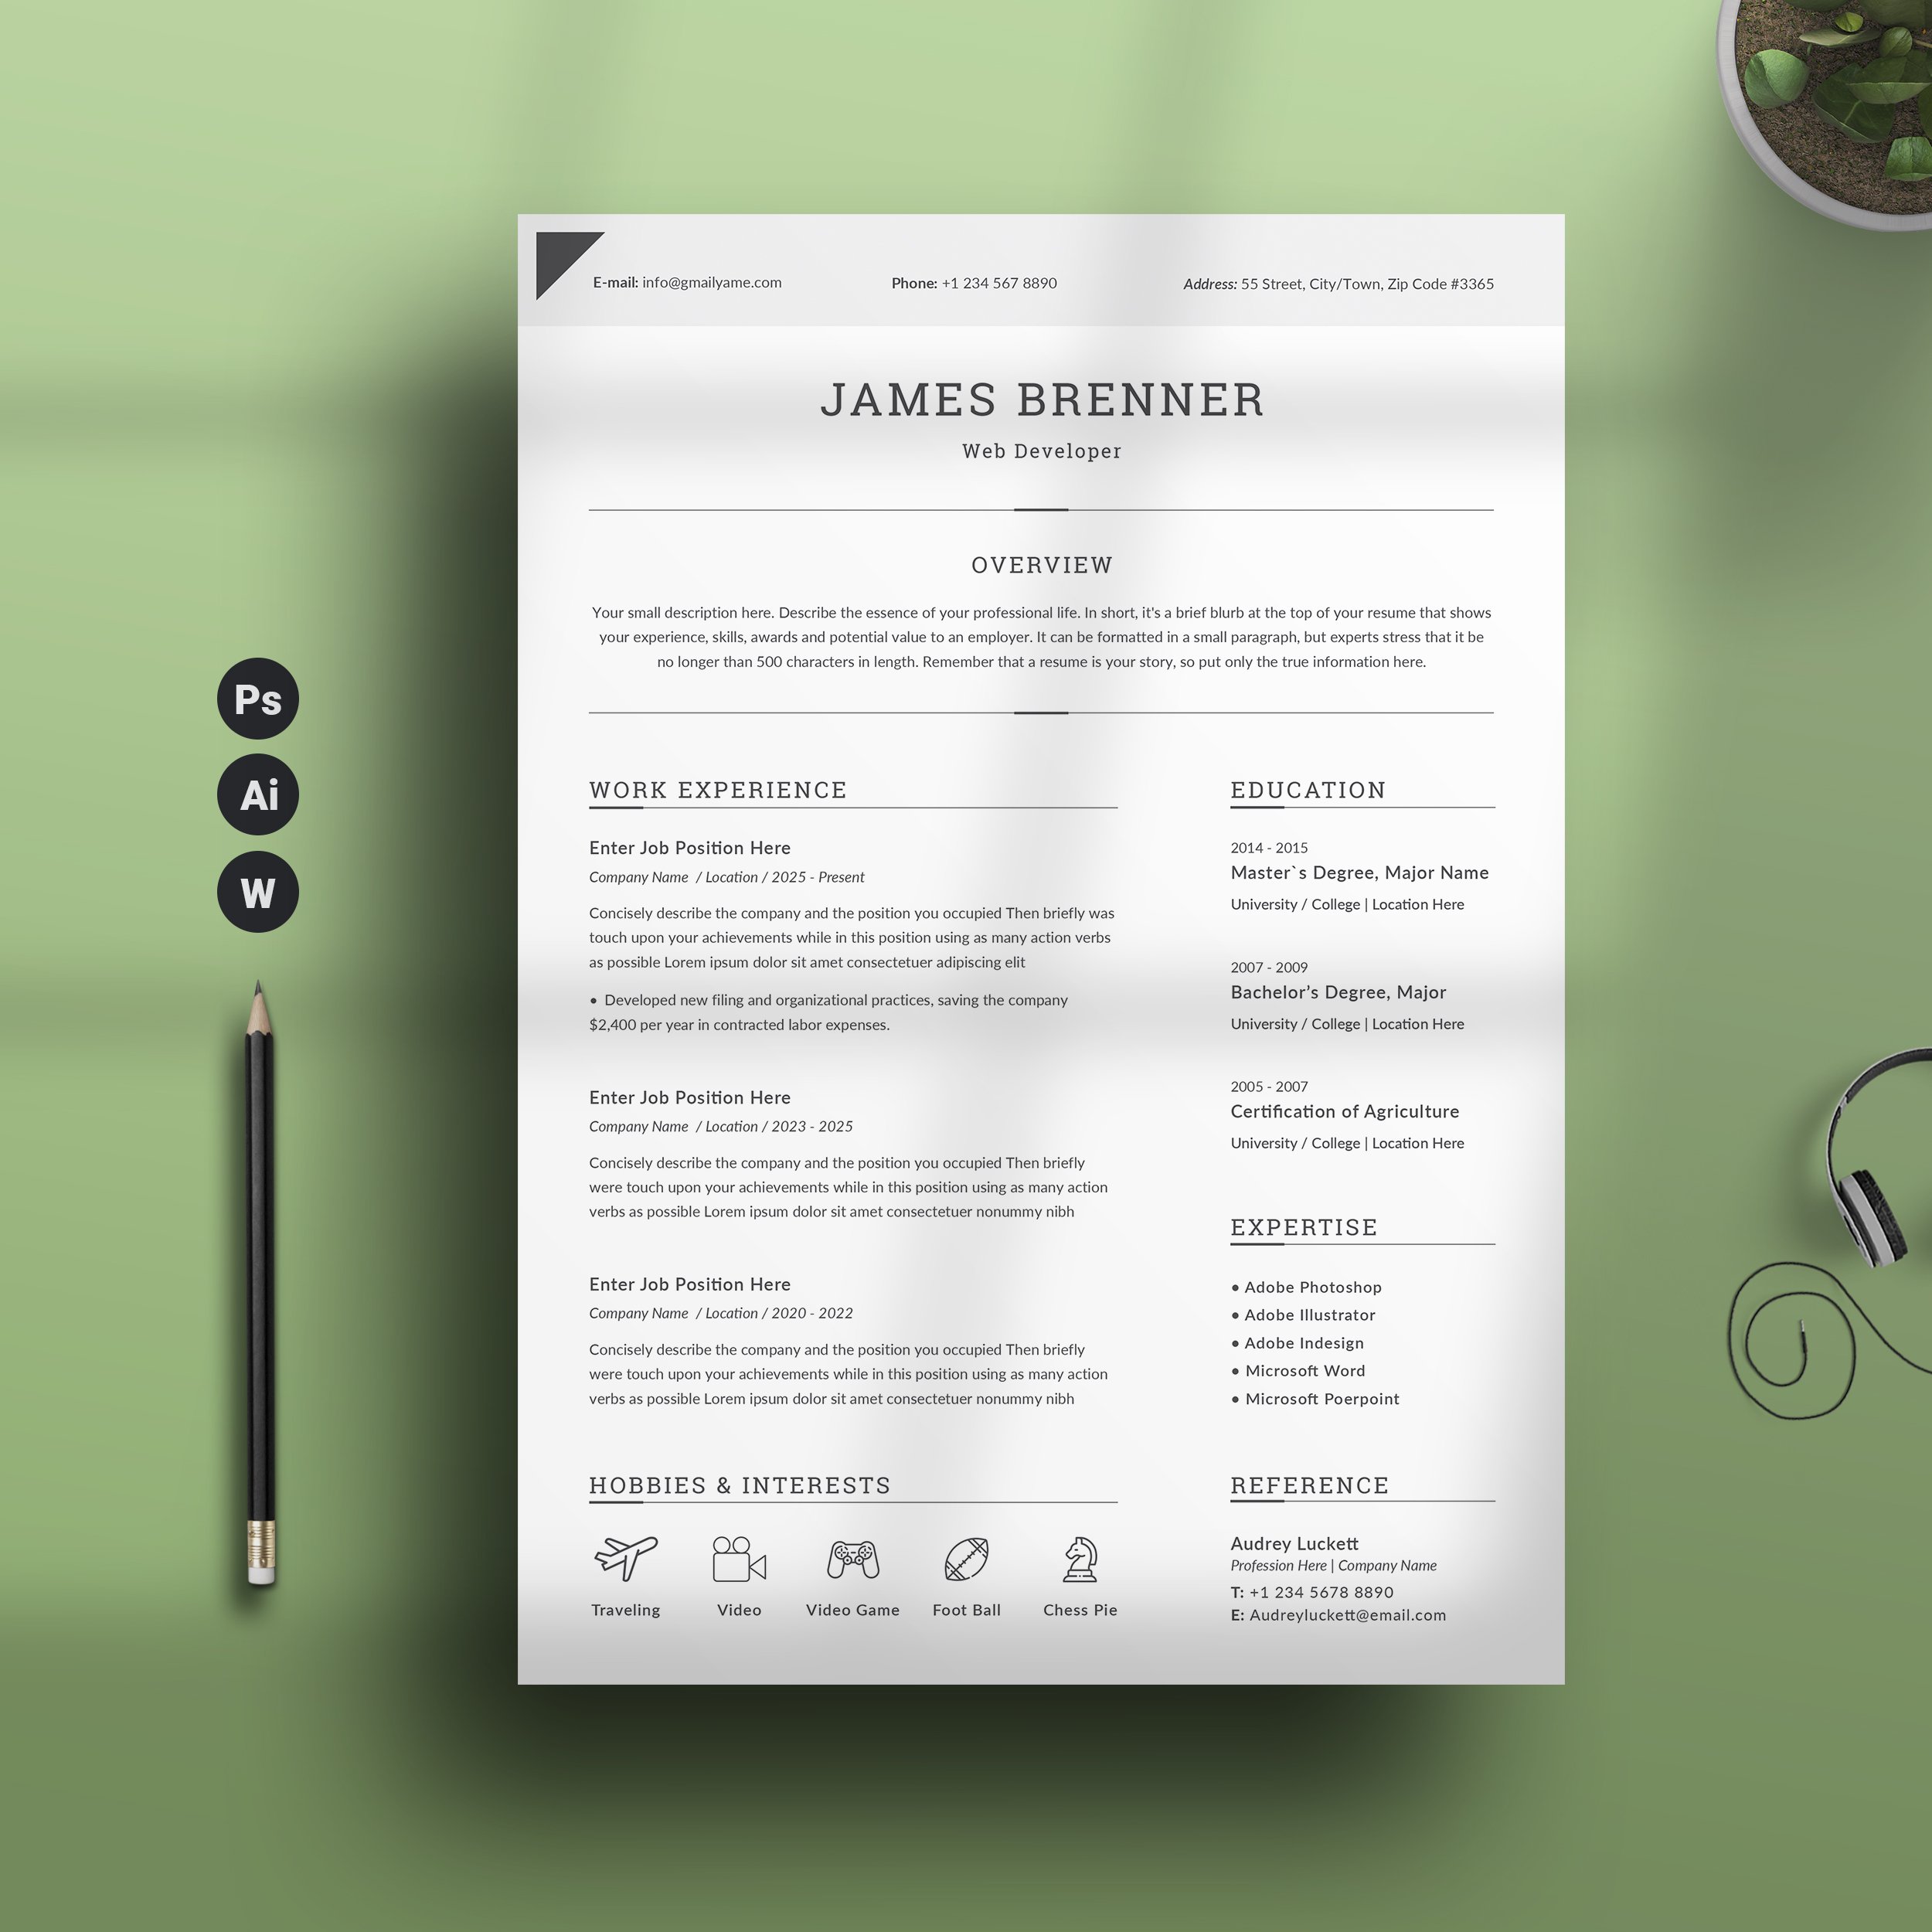 Clean and modern resume template on a green background.